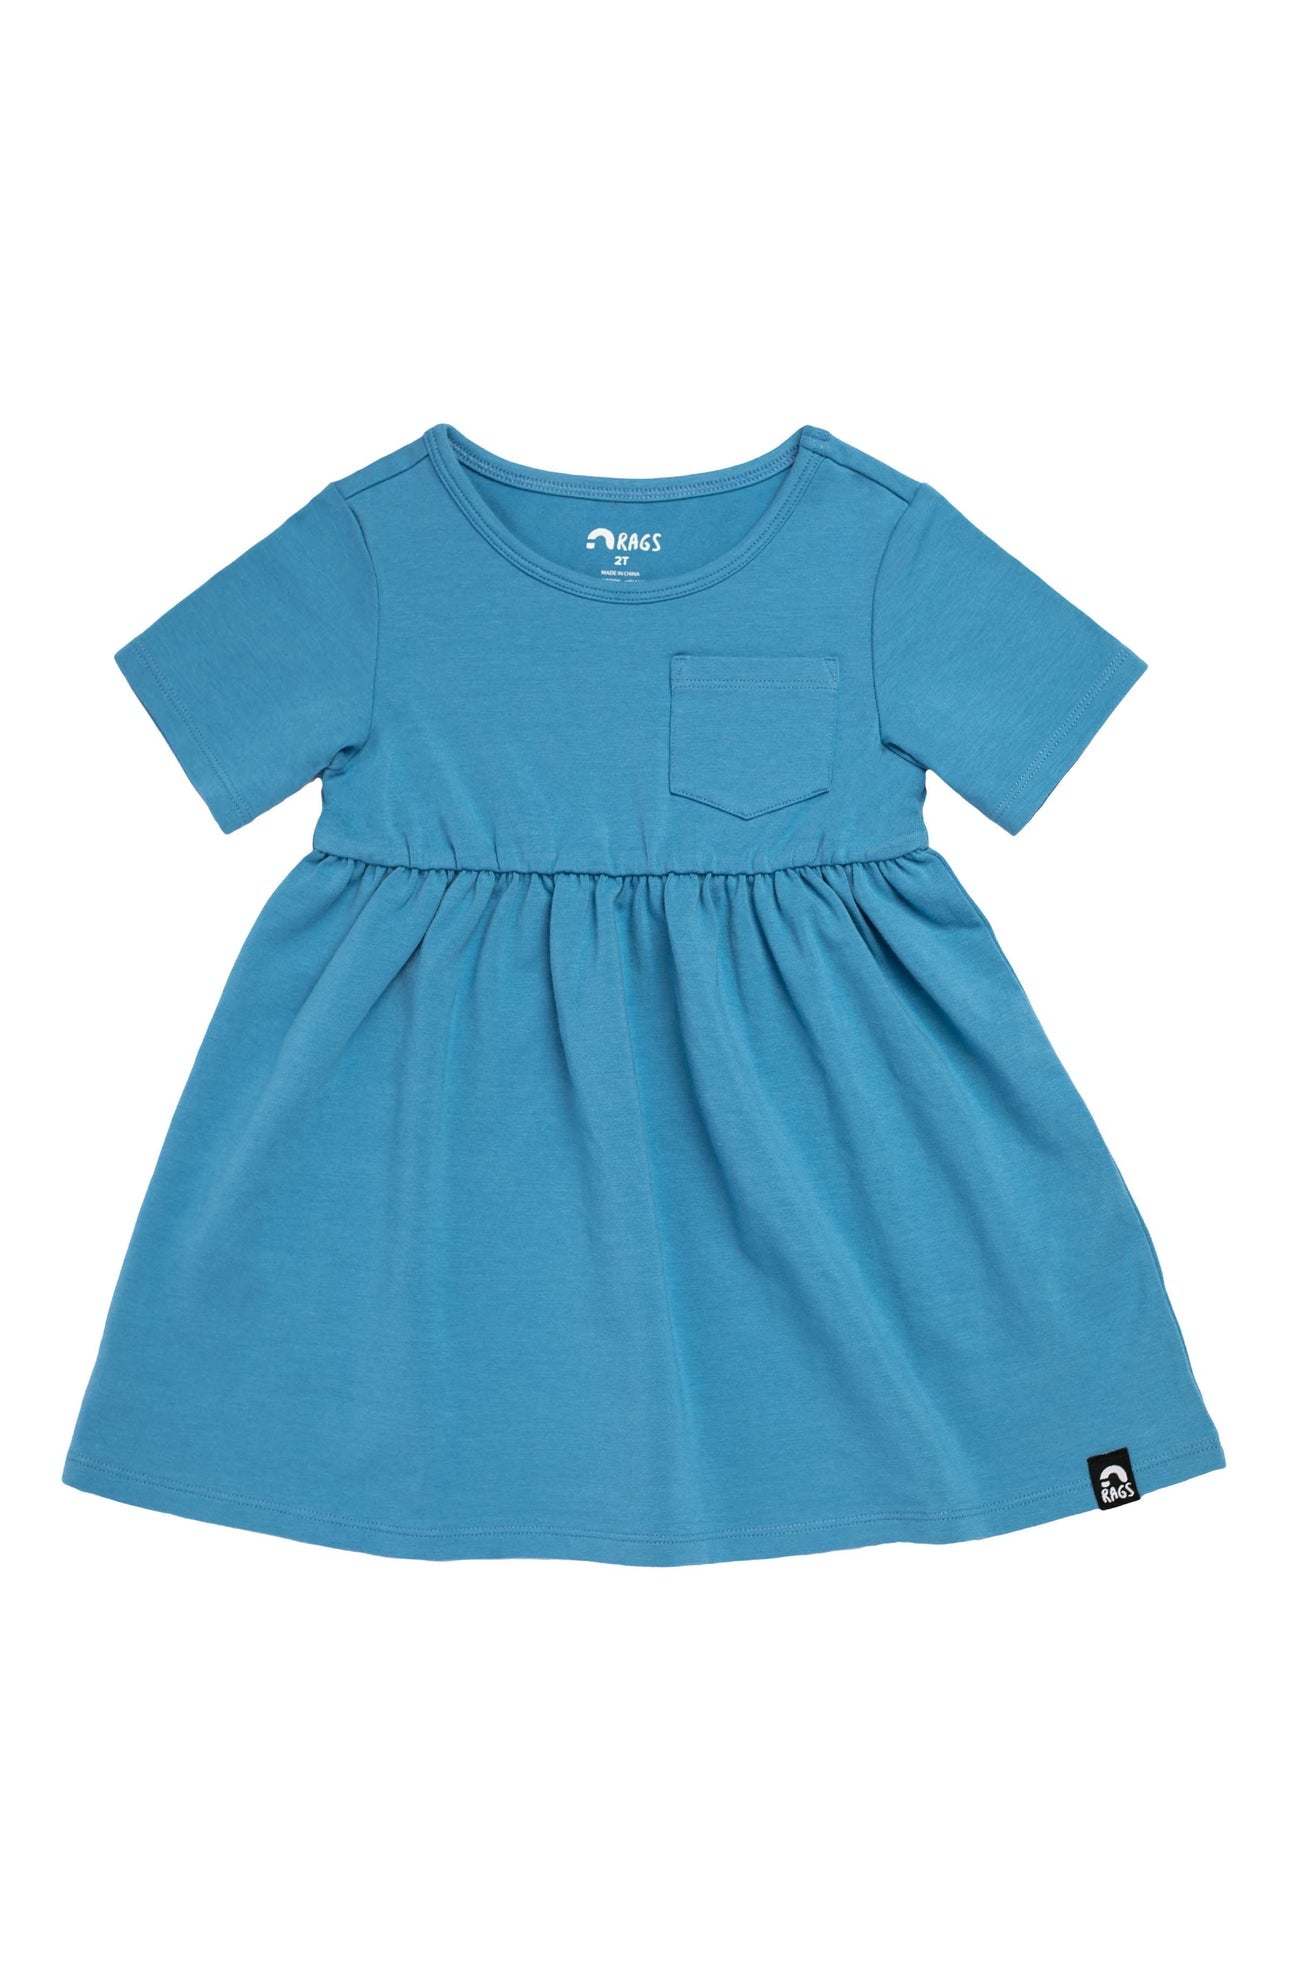 RAGS Essentials Short Sleeve with Chest Pocket Dress